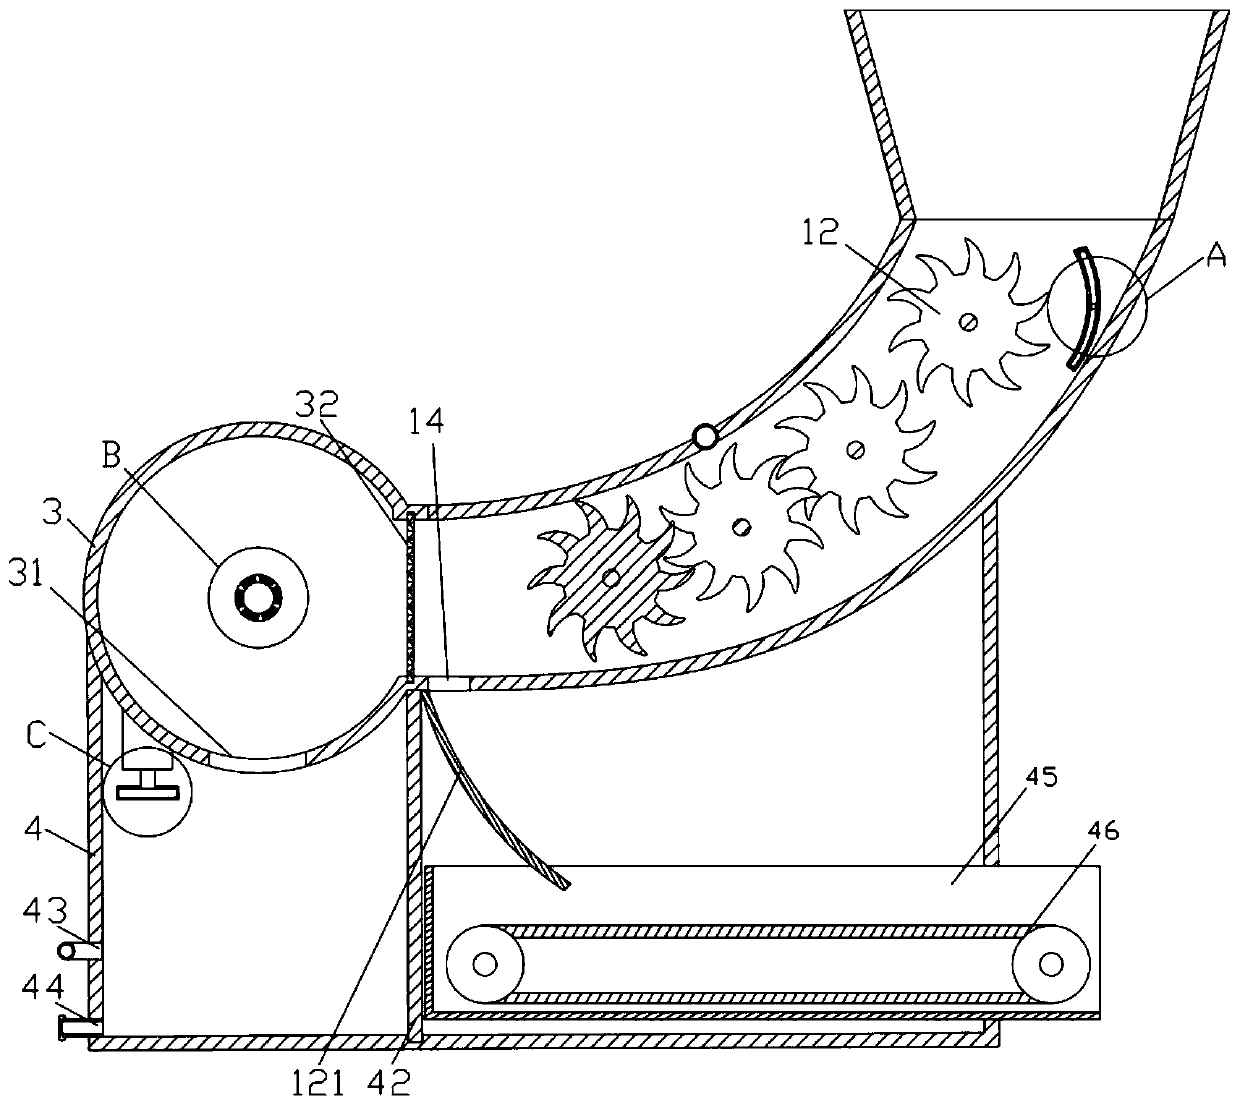 Automobile crushing device for recovering waste automobiles